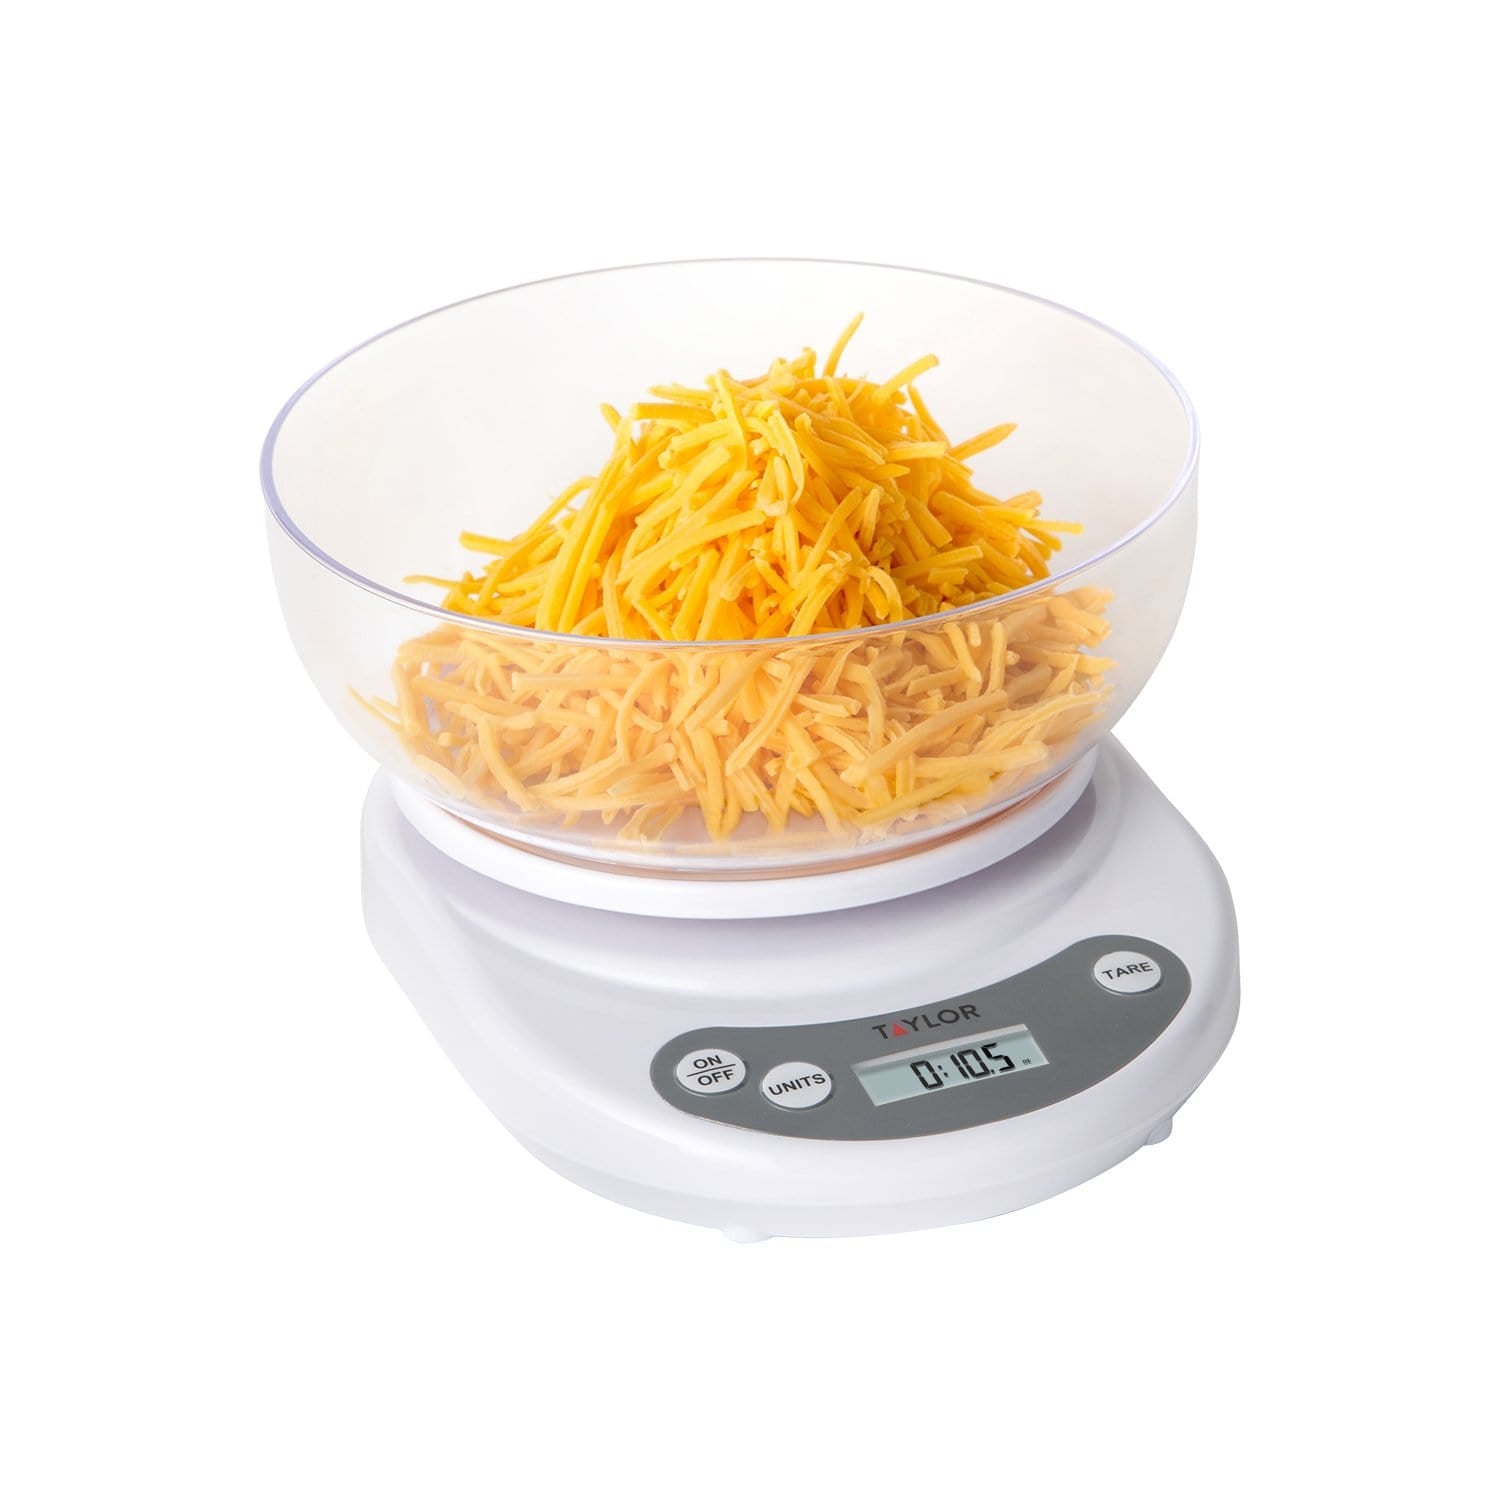 Precise Measuring with the Taylor Digital Measuring Cup!